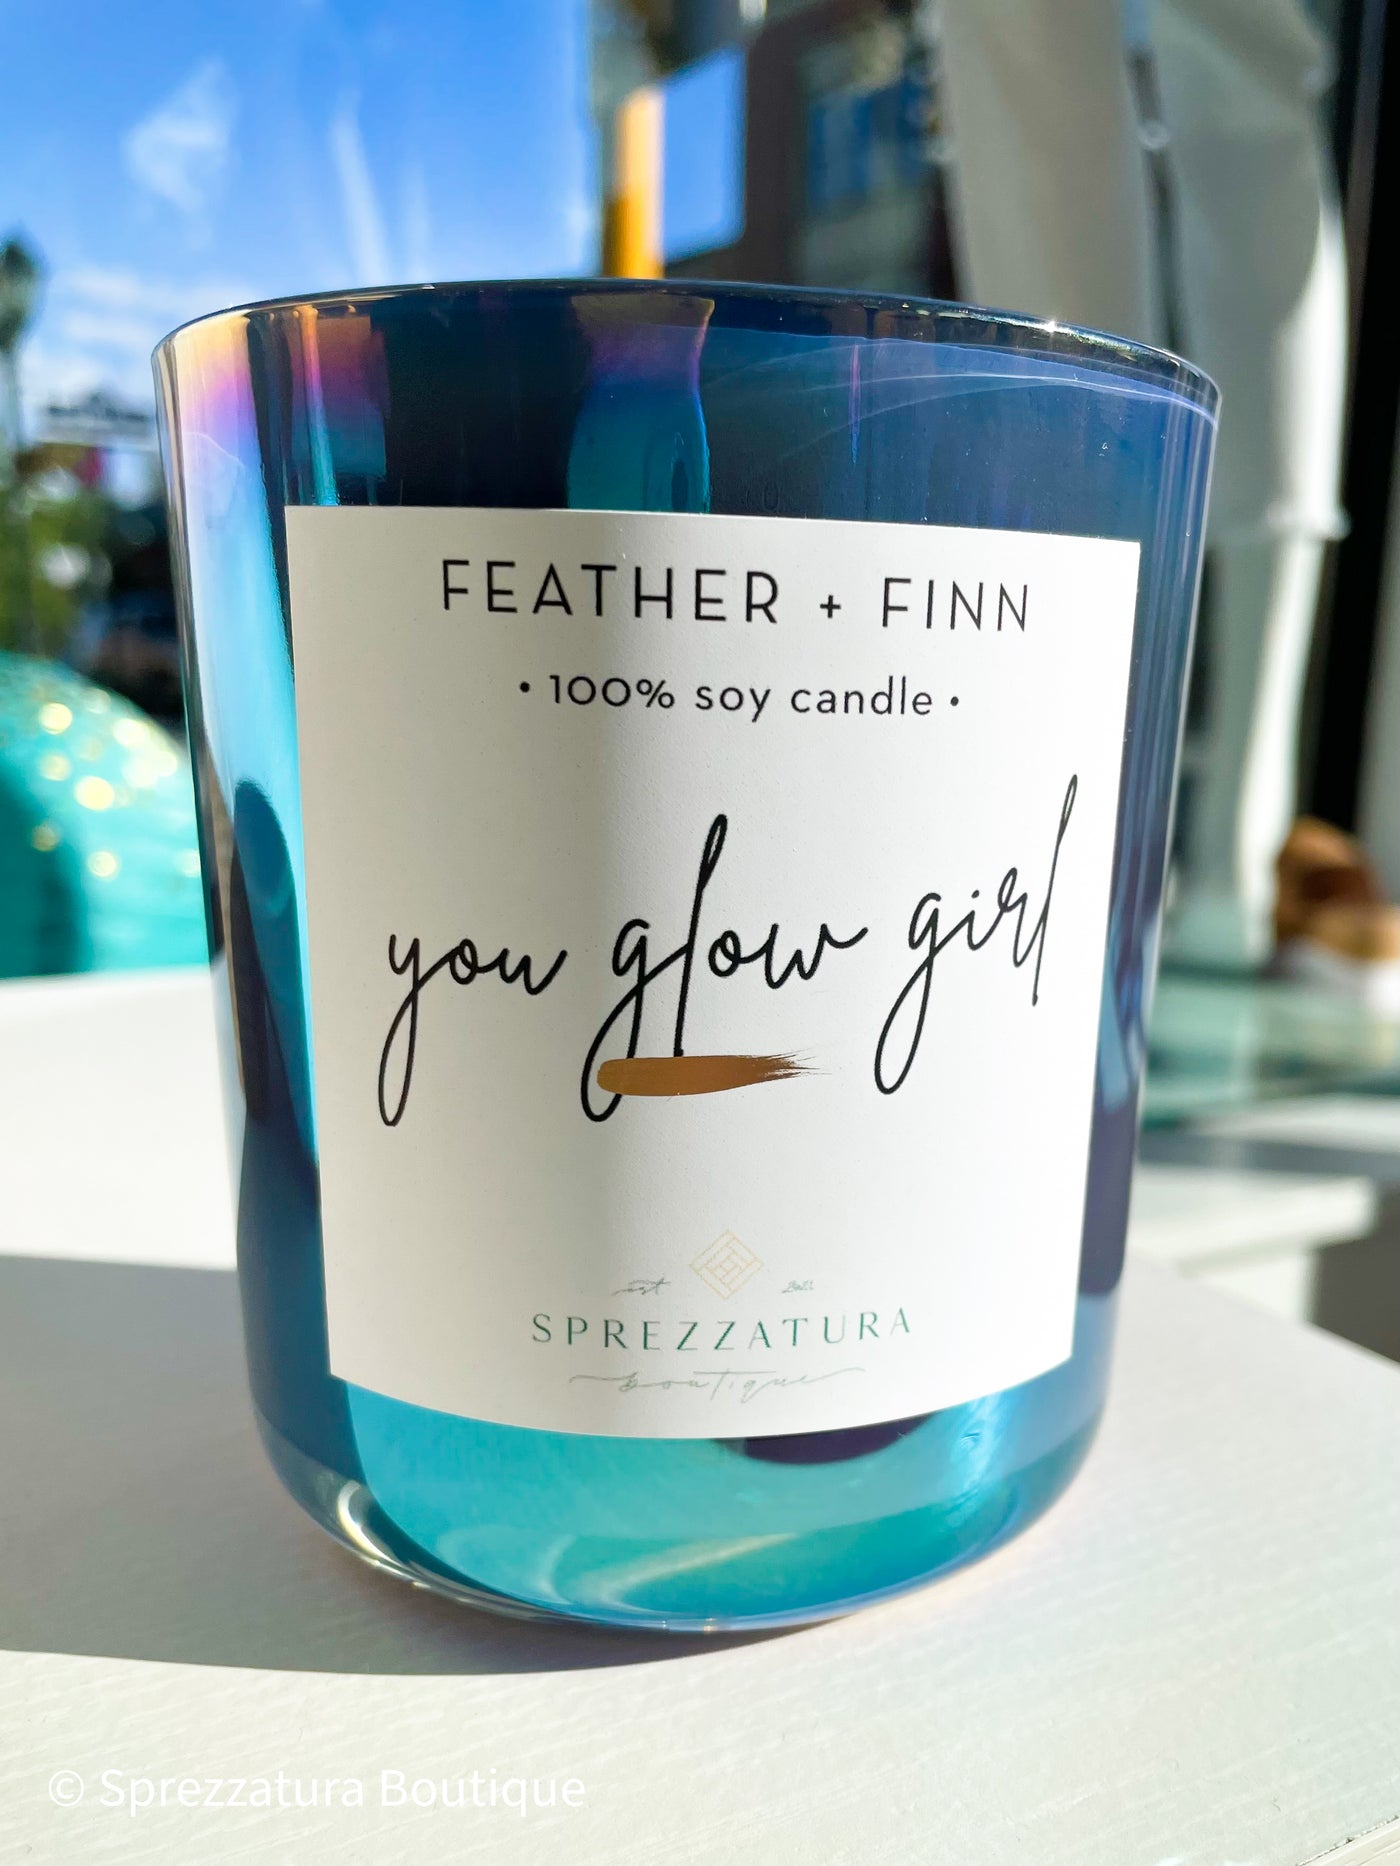 Iridescent blue glass tumbler all natural small business made candle. Summer limited edition with reusable glass container.